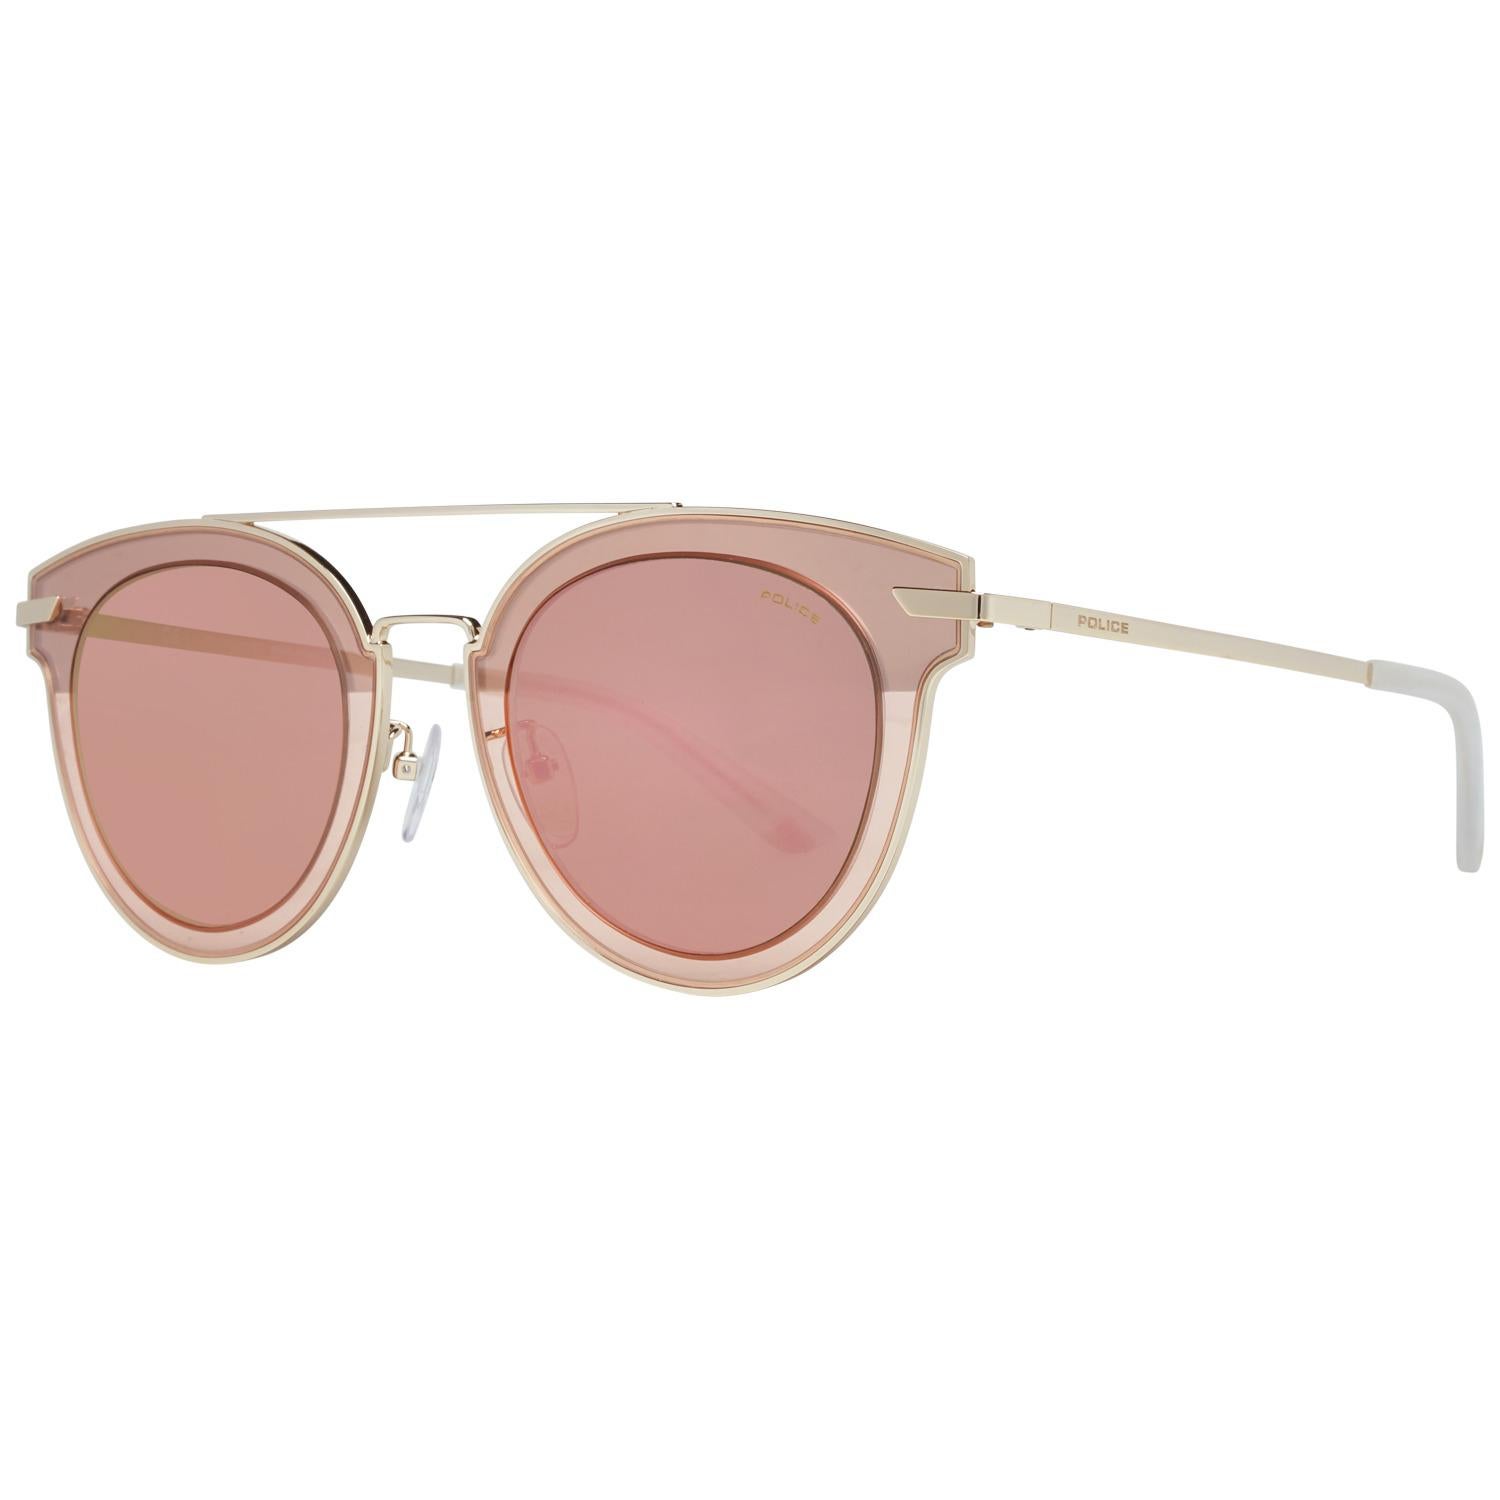 Details
MATERIAL: Metal
COLOR: Rose Gold
MODEL: SPL543G50300R
GENDER: Adult Unisex
COUNTRY OF MANUFACTURE: Italy
TYPE: Sunglasses
ORIGINAL CASE?: Yes
STYLE: Round
OCCASION: Casual
FEATURES: Lightweight
LENS COLOR: Grey
LENS TECHNOLOGY: Mirrored
YEAR